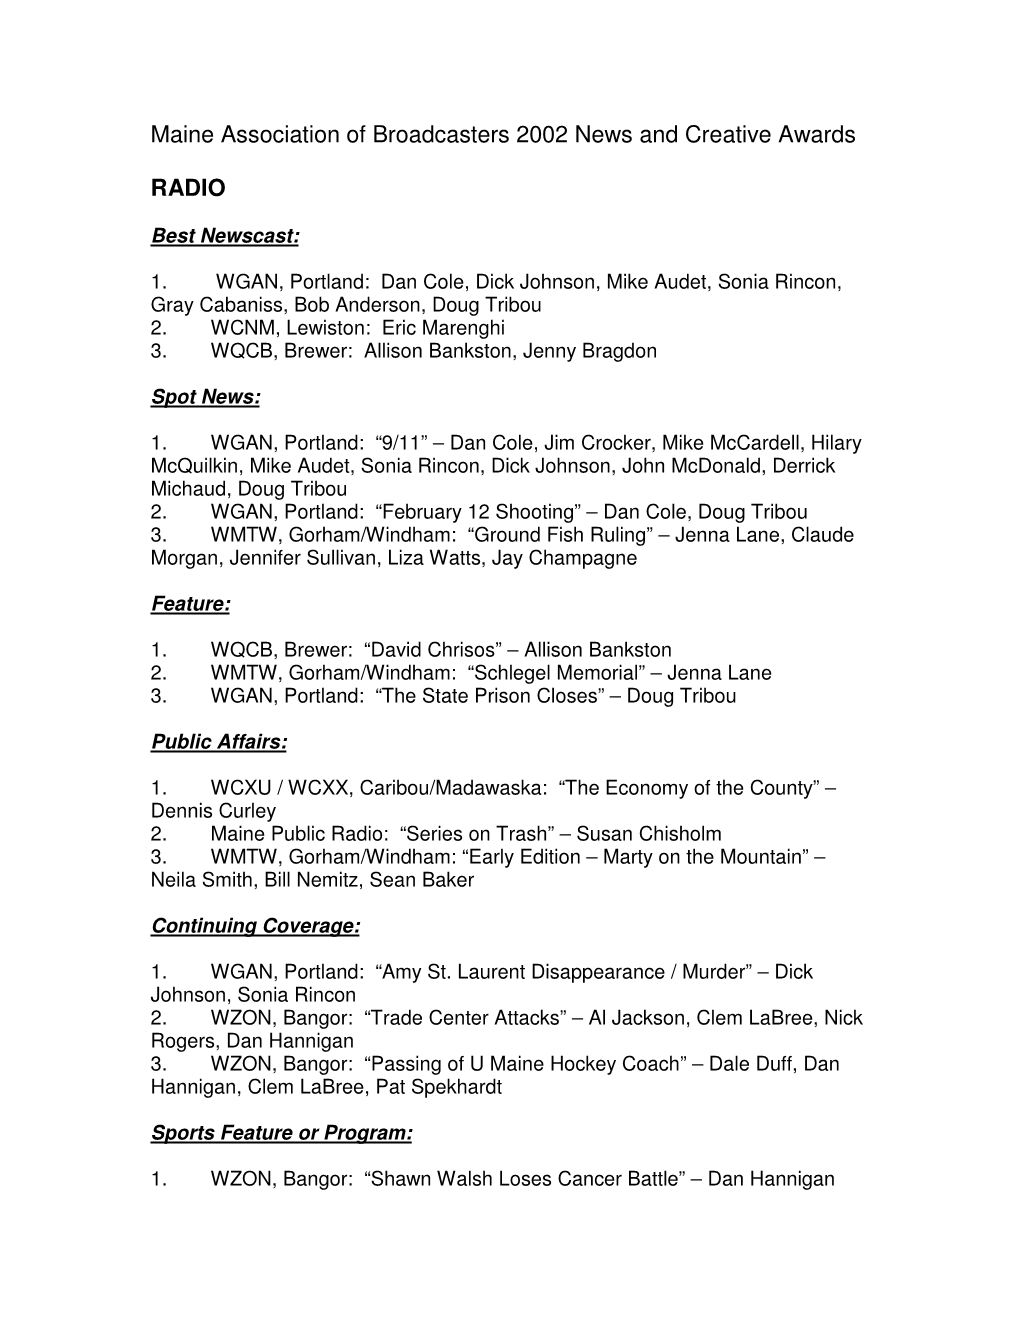 Maine Association of Broadcasters 2002 News and Creative Awards RADIO